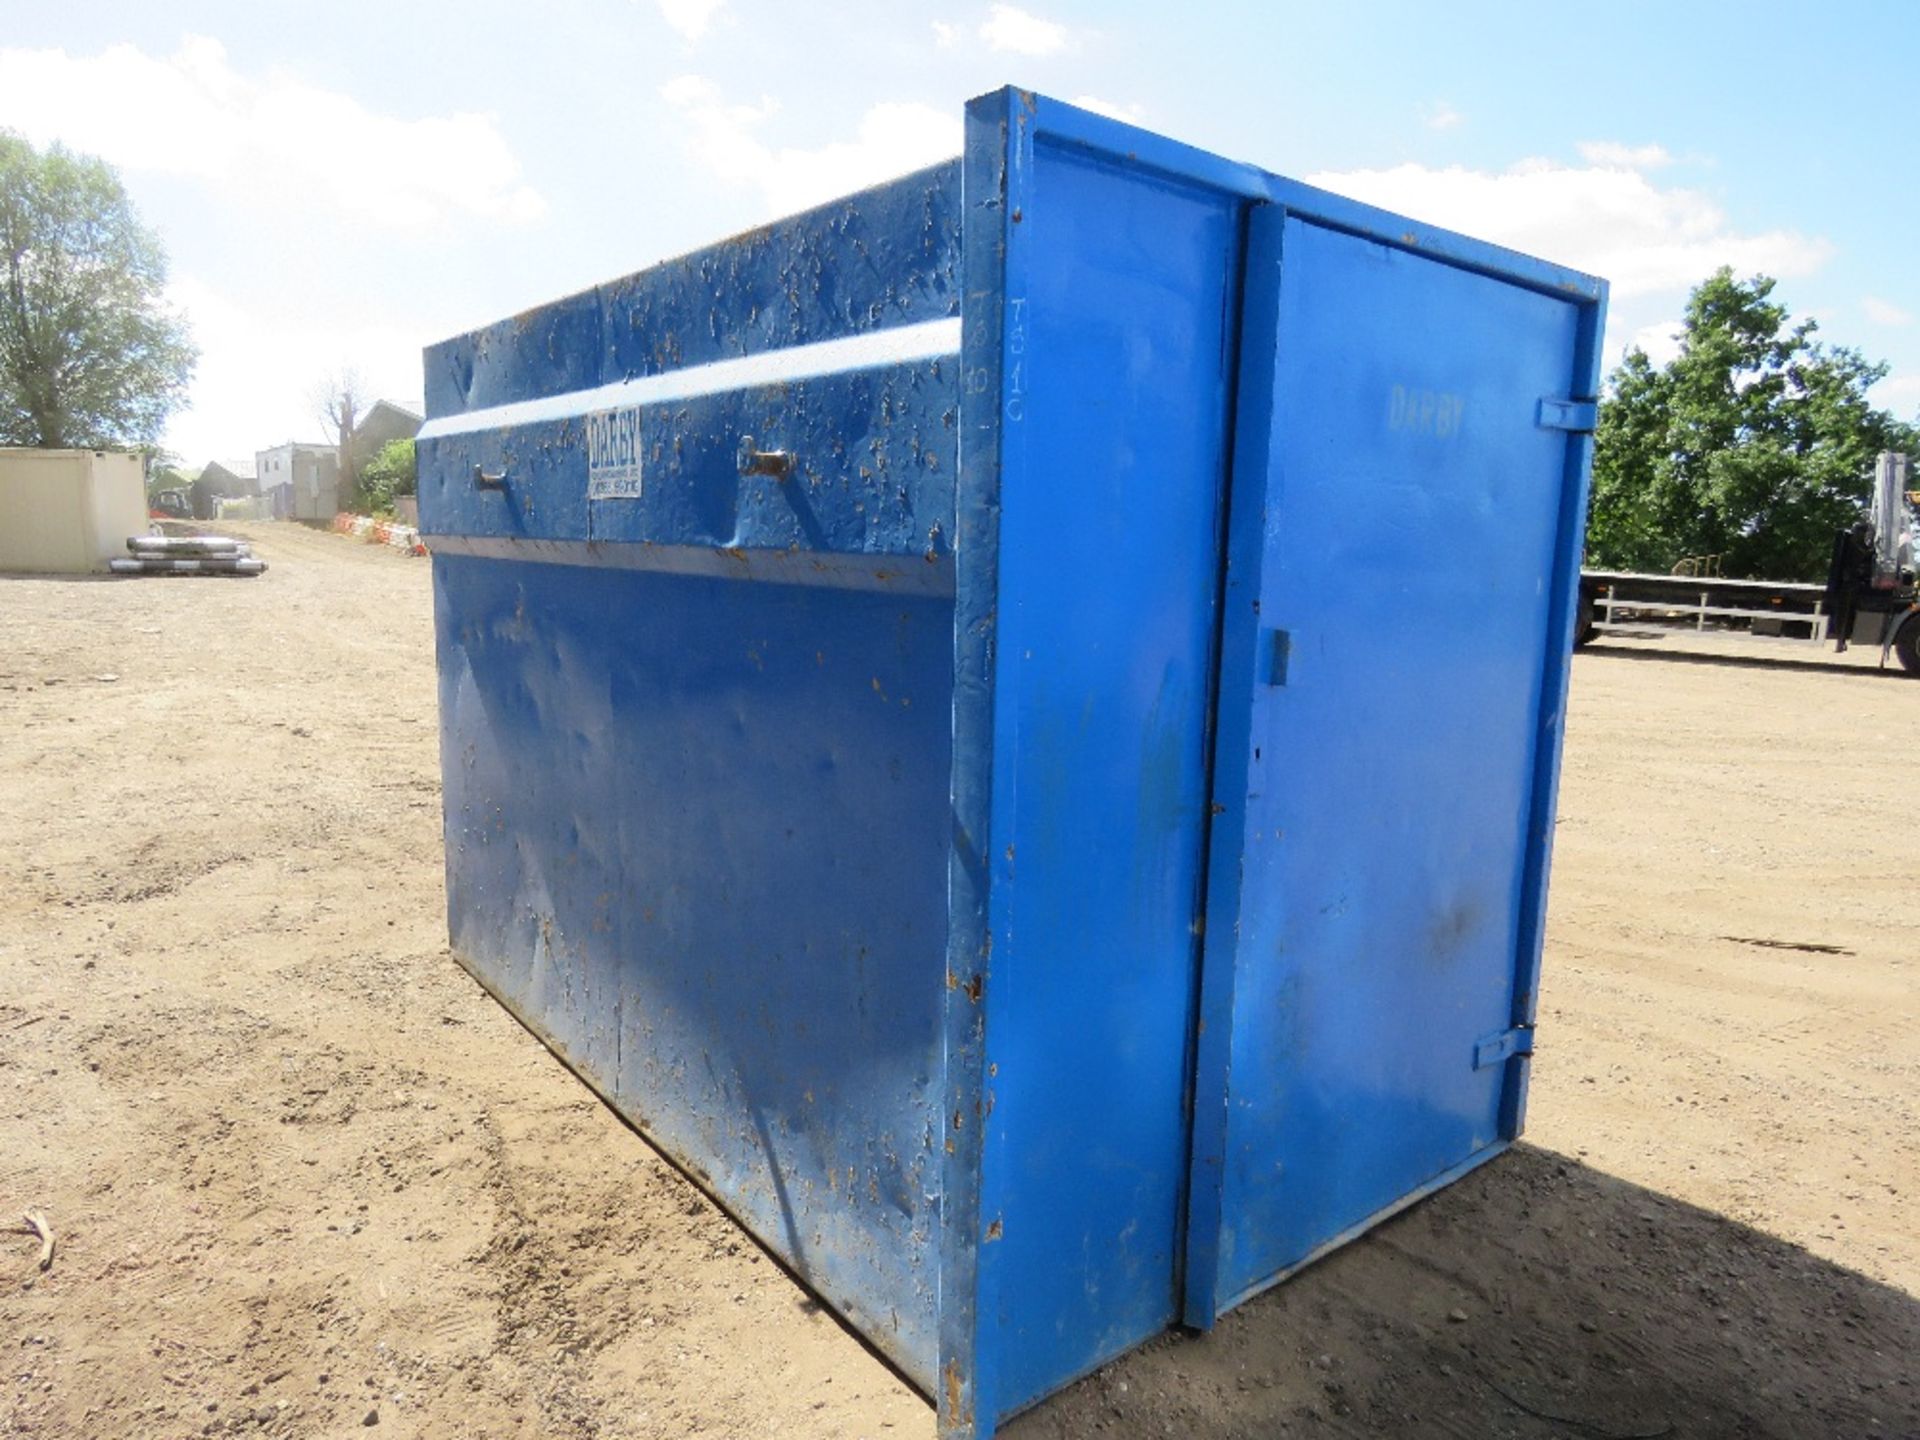 SKIP CHAIN LIFT ENCLOSED STEEL STORAGE CONTAINER 3M X 1.75M APPROX TS10 WITH KEYS. DIRECT FROM - Image 2 of 6